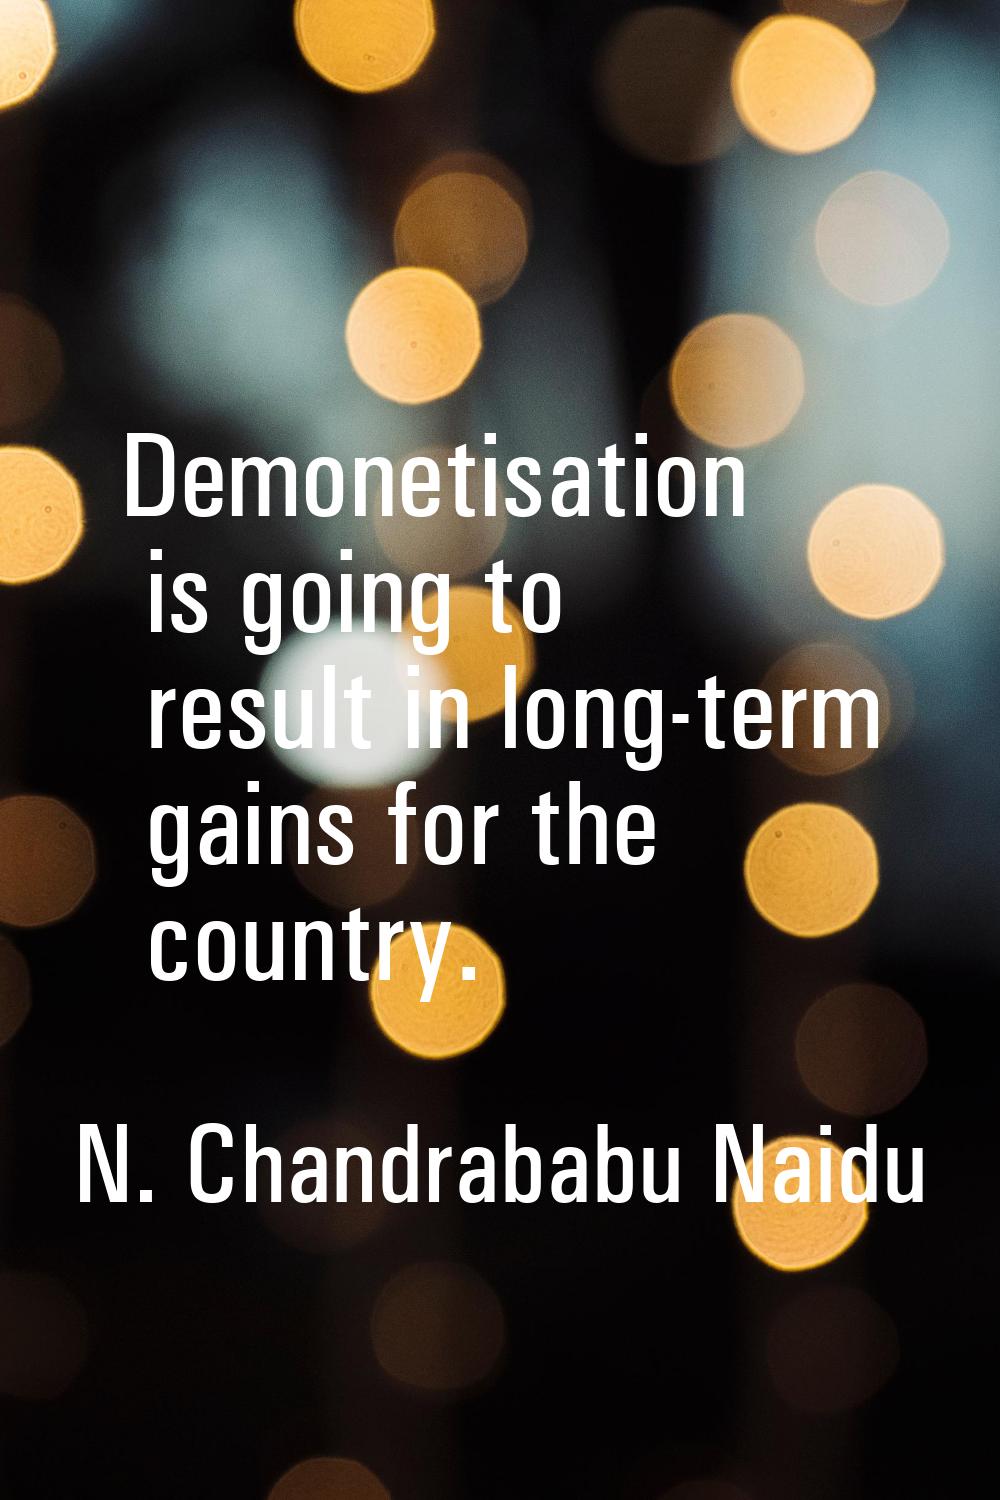 Demonetisation is going to result in long-term gains for the country.